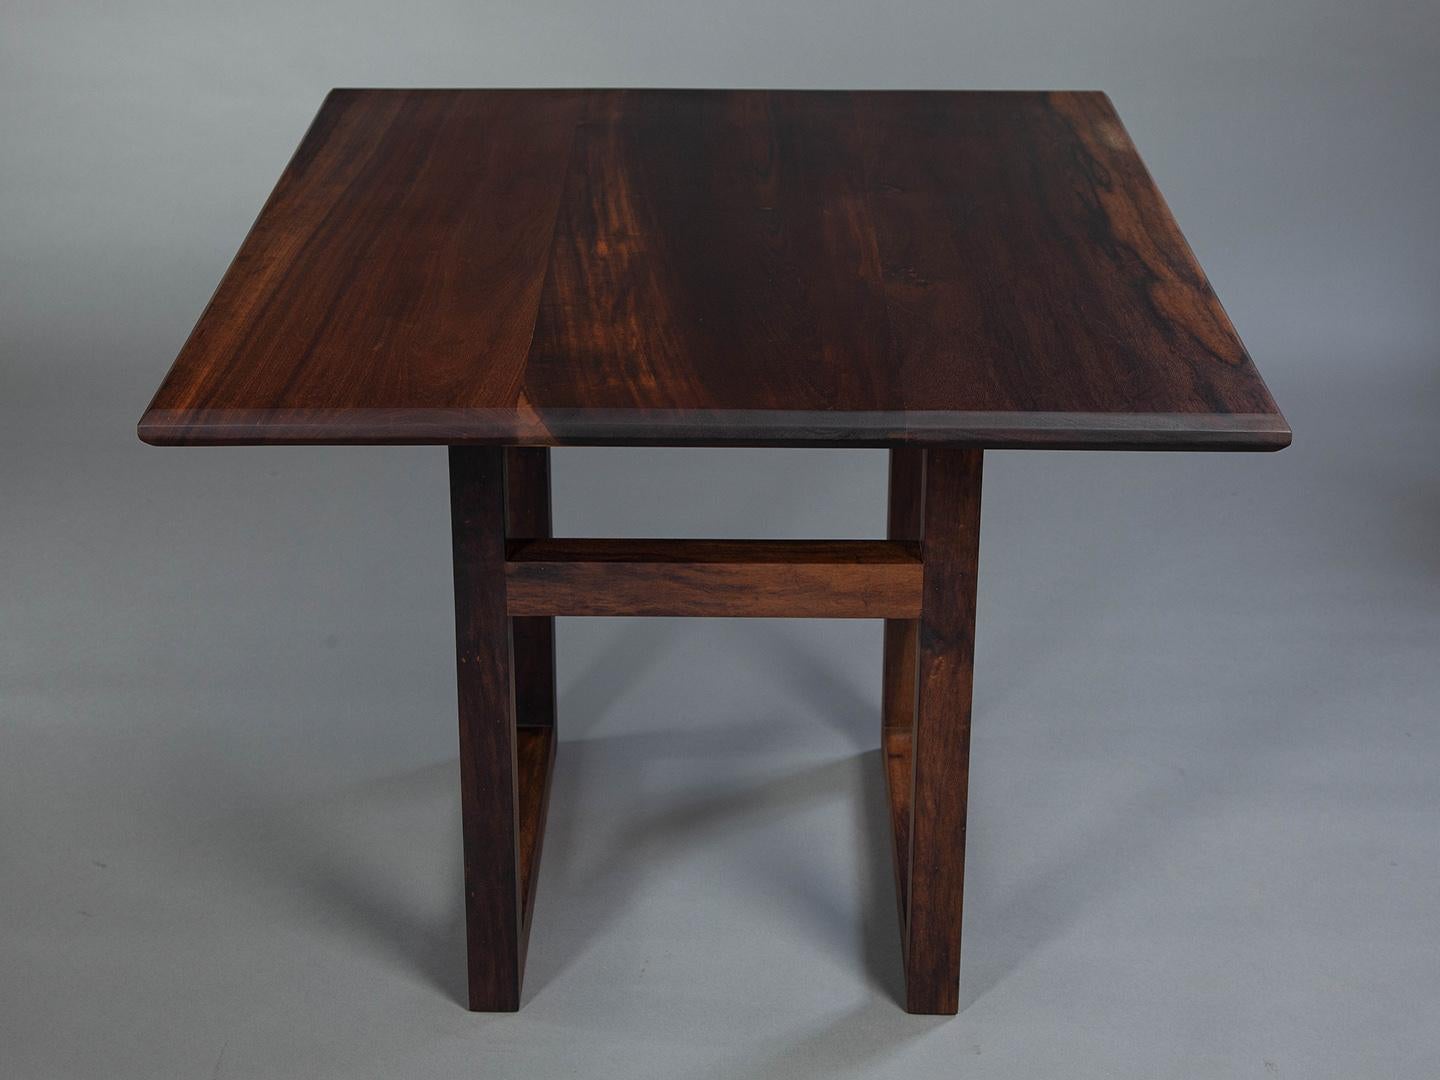 The Lubambo Side Table. Brazilian Solid Wood with tenons and joinery  For Sale 4